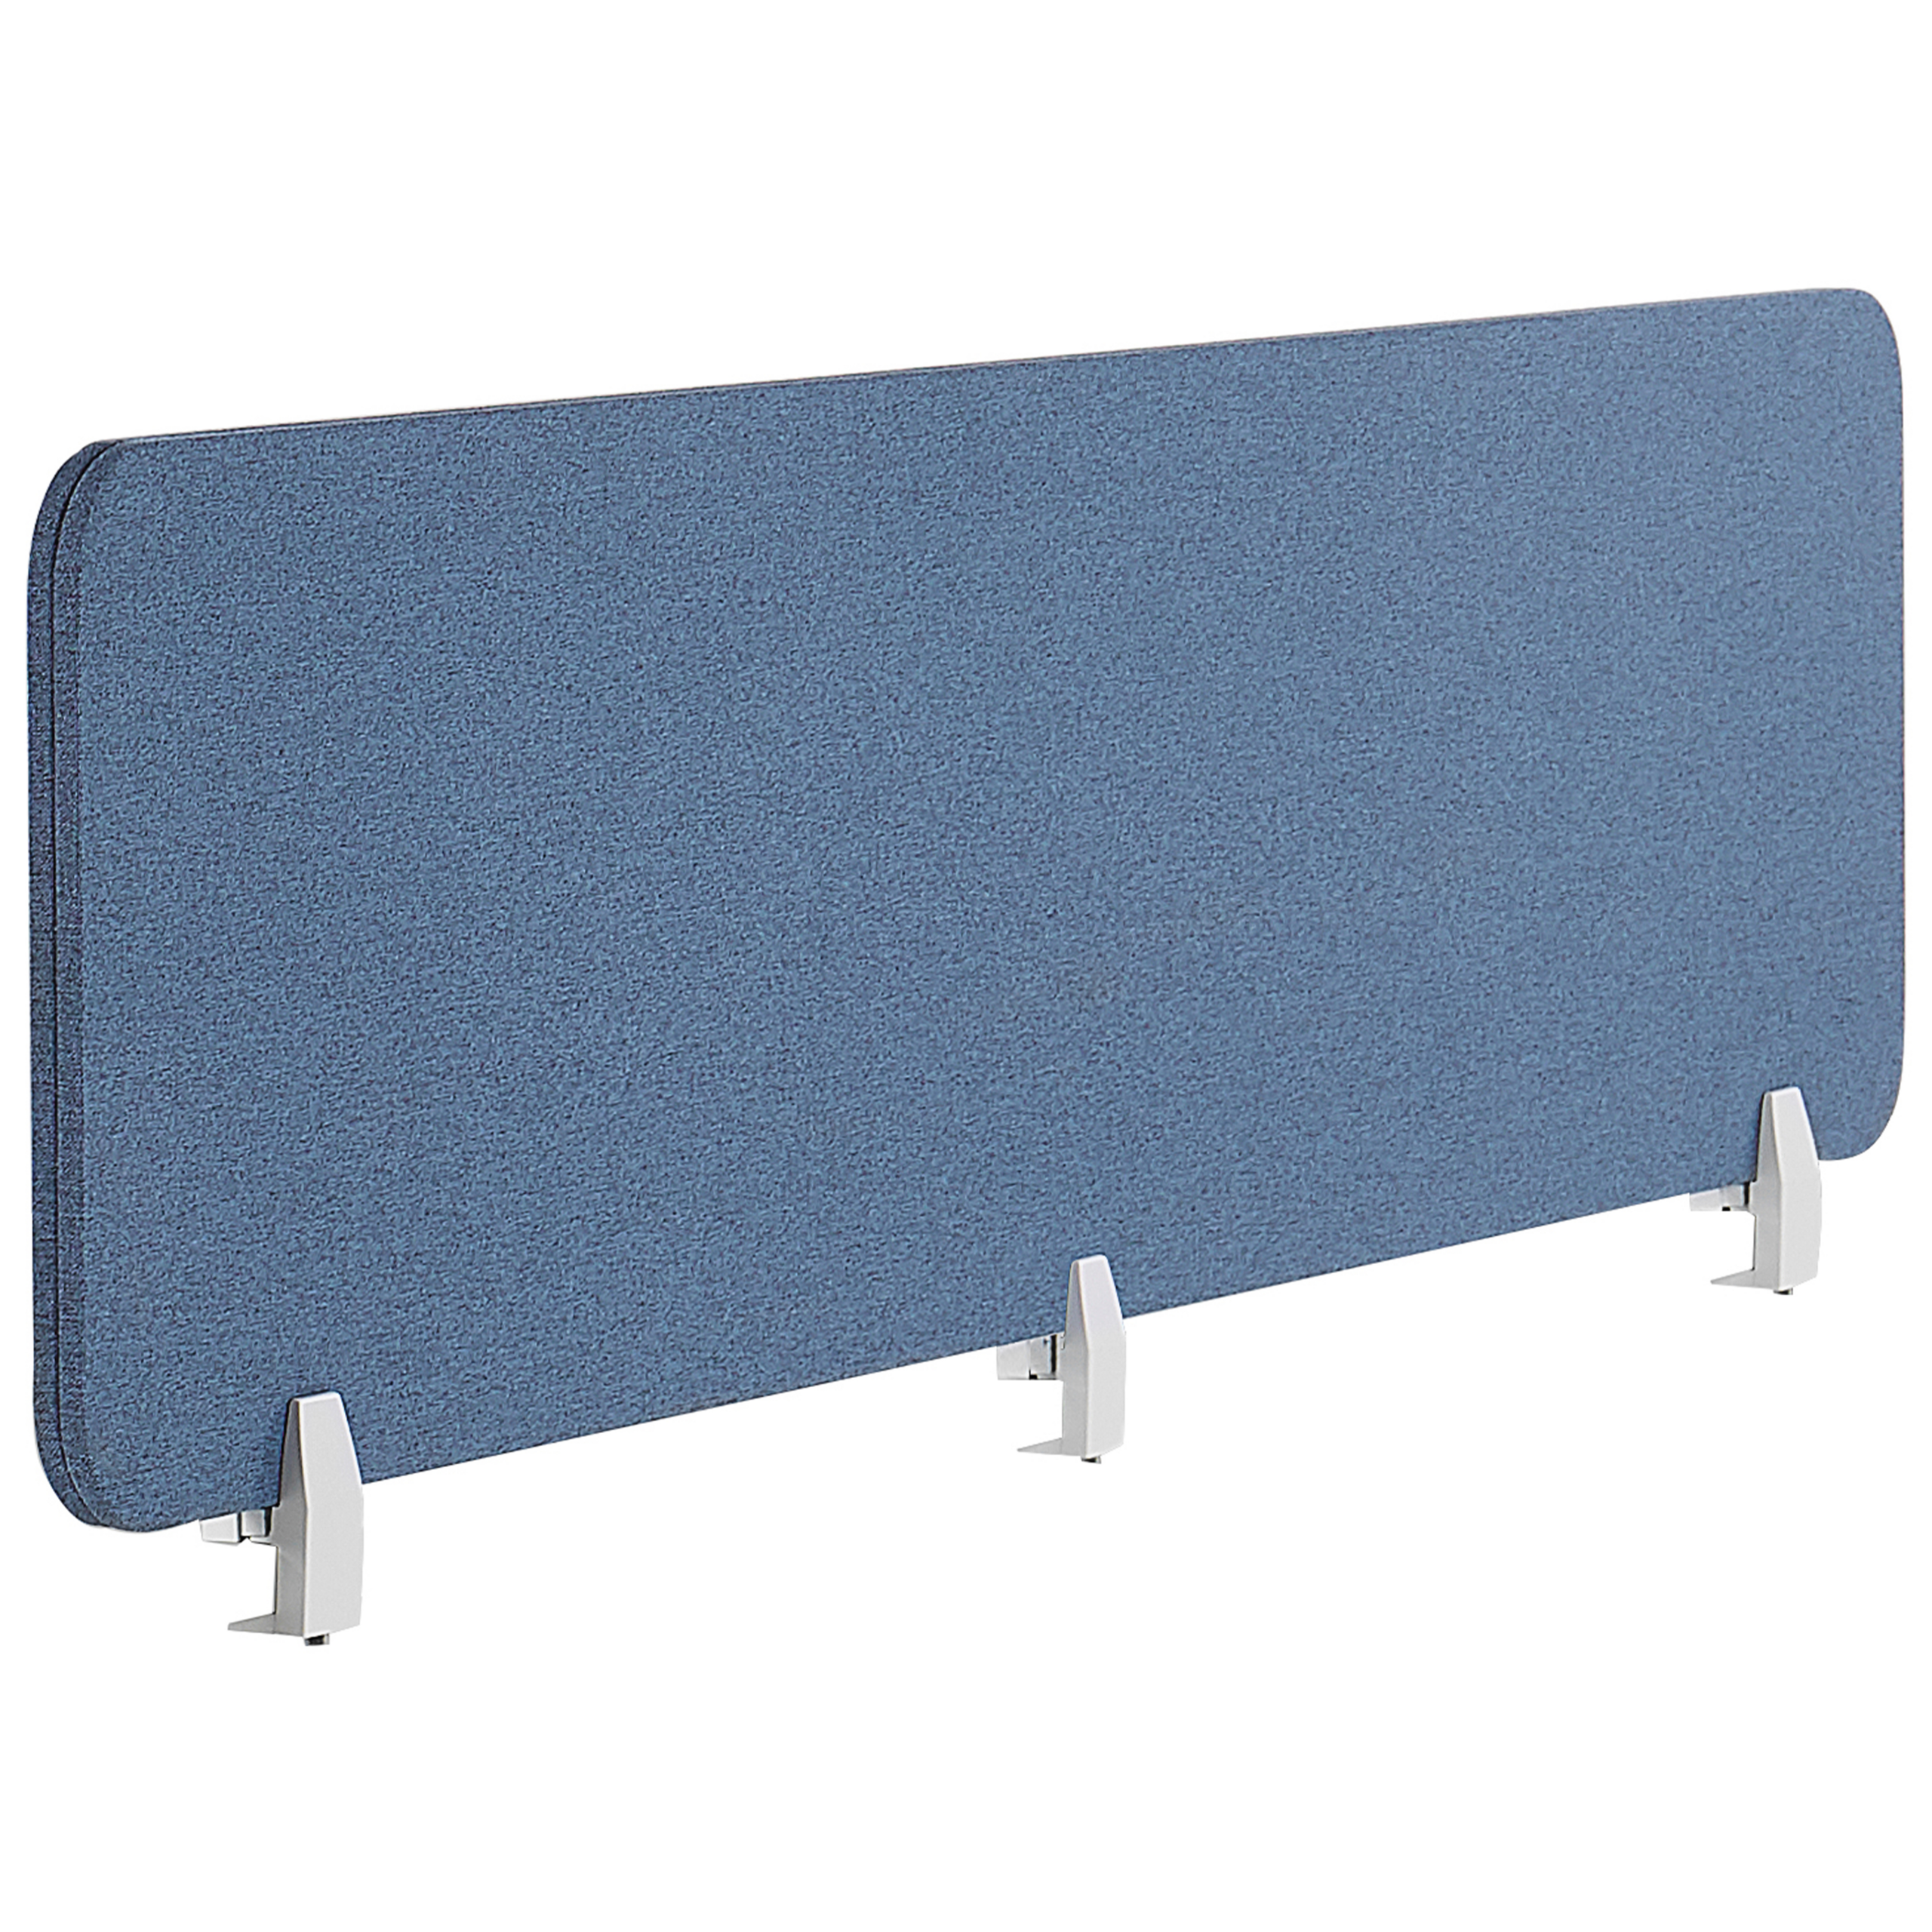 Beliani Desk Screen Blue PET Board Fabric Cover 180 x 40 cm Acoustic Screen Modular Mounting Clamps Home Office Material:Polyester Size:2x40x180